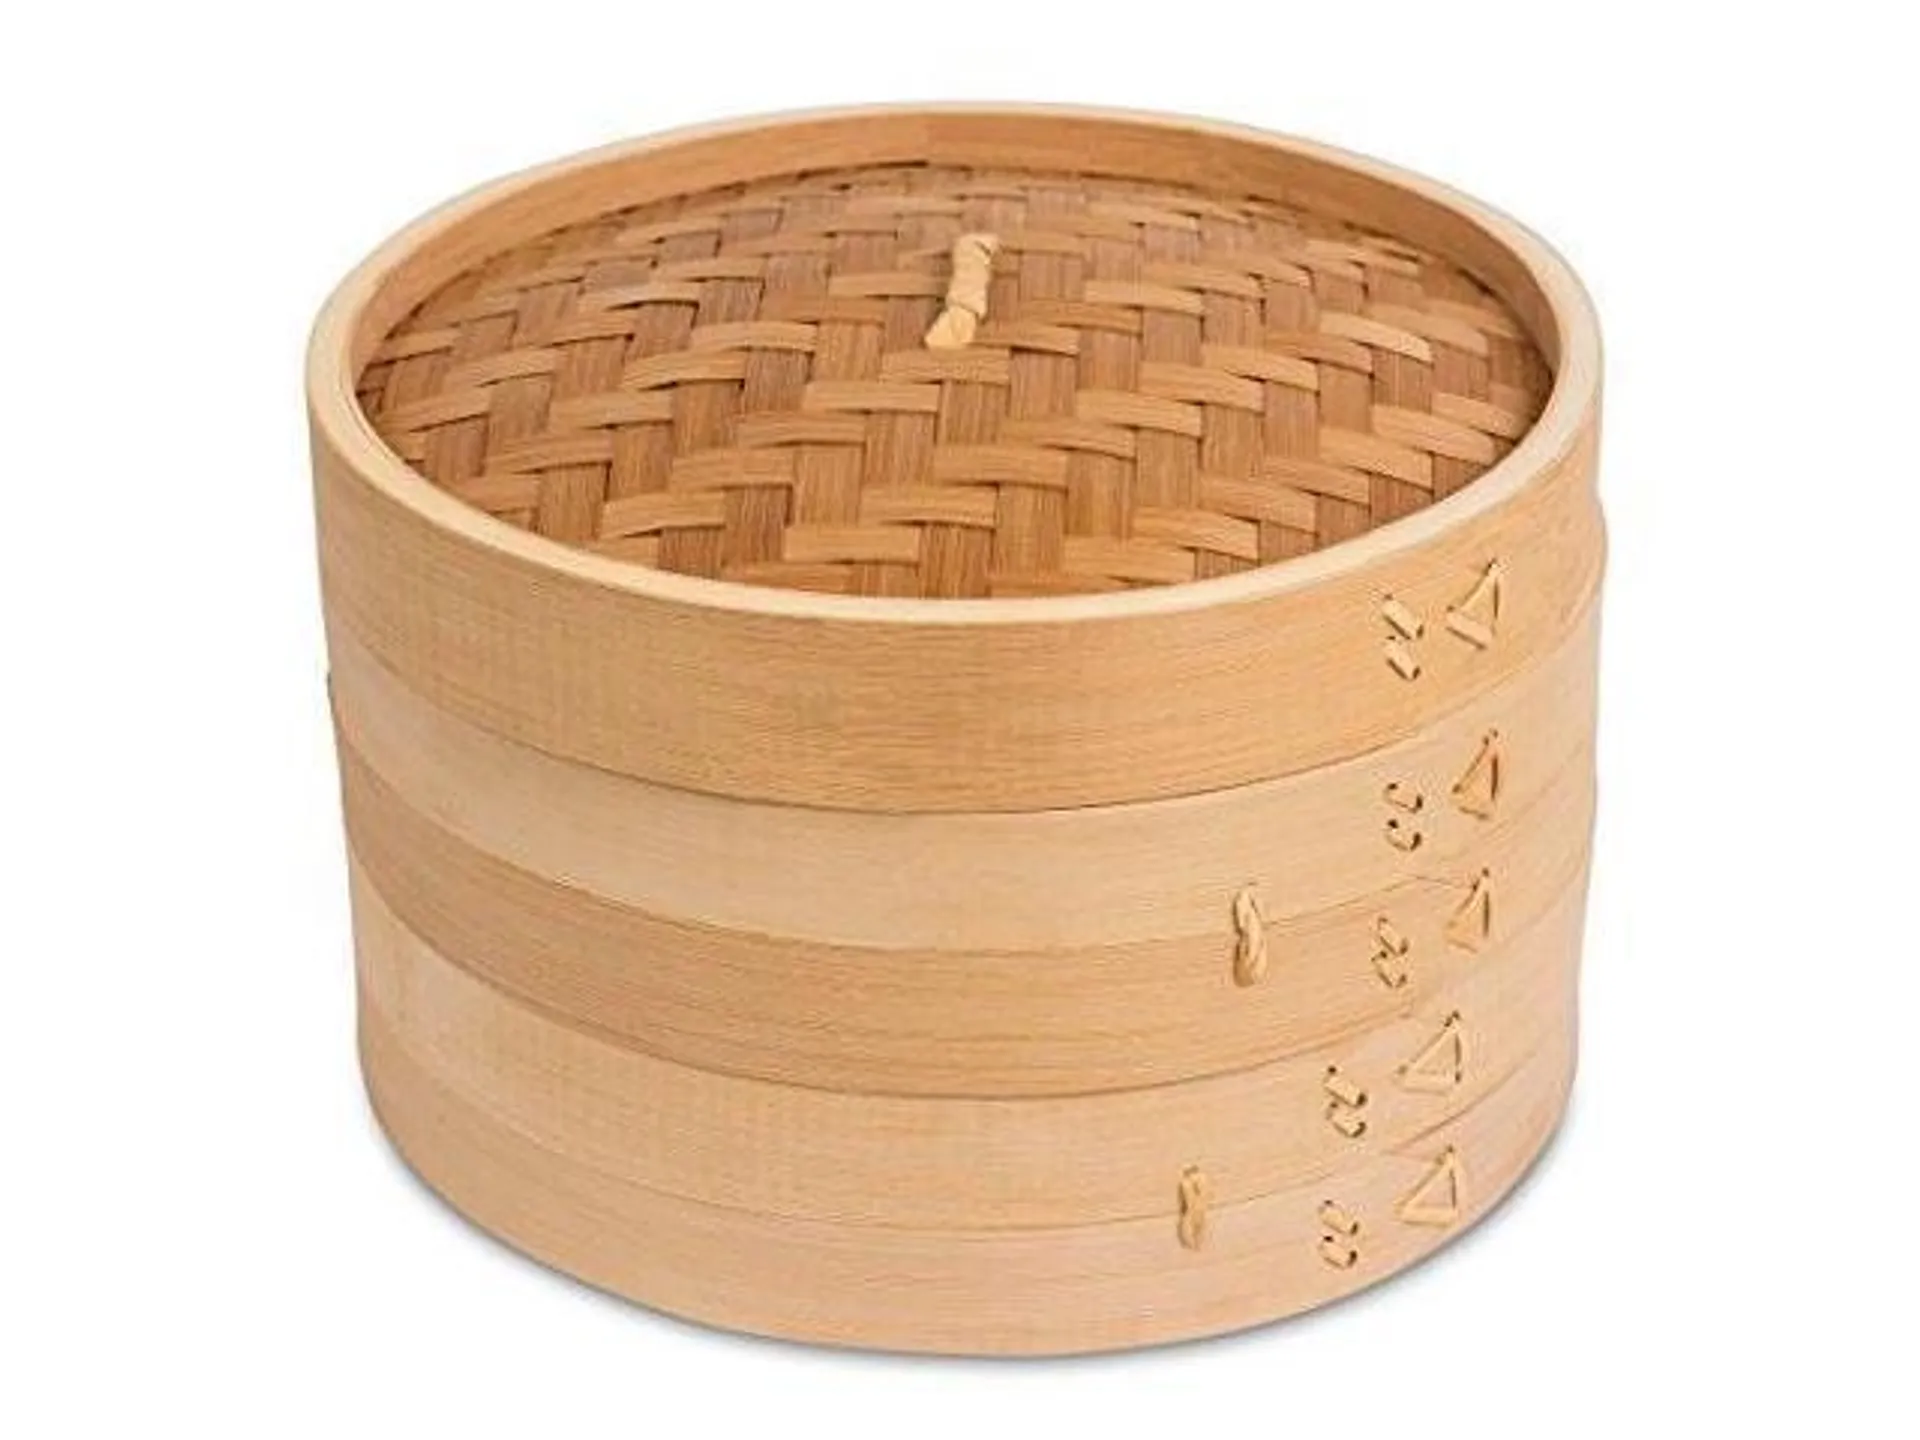 birdrock home 10 inch bamboo steamer | classic traditional design | healthy cooking | great for dumplings, vegetables, chicken, fish | steam basket | natural